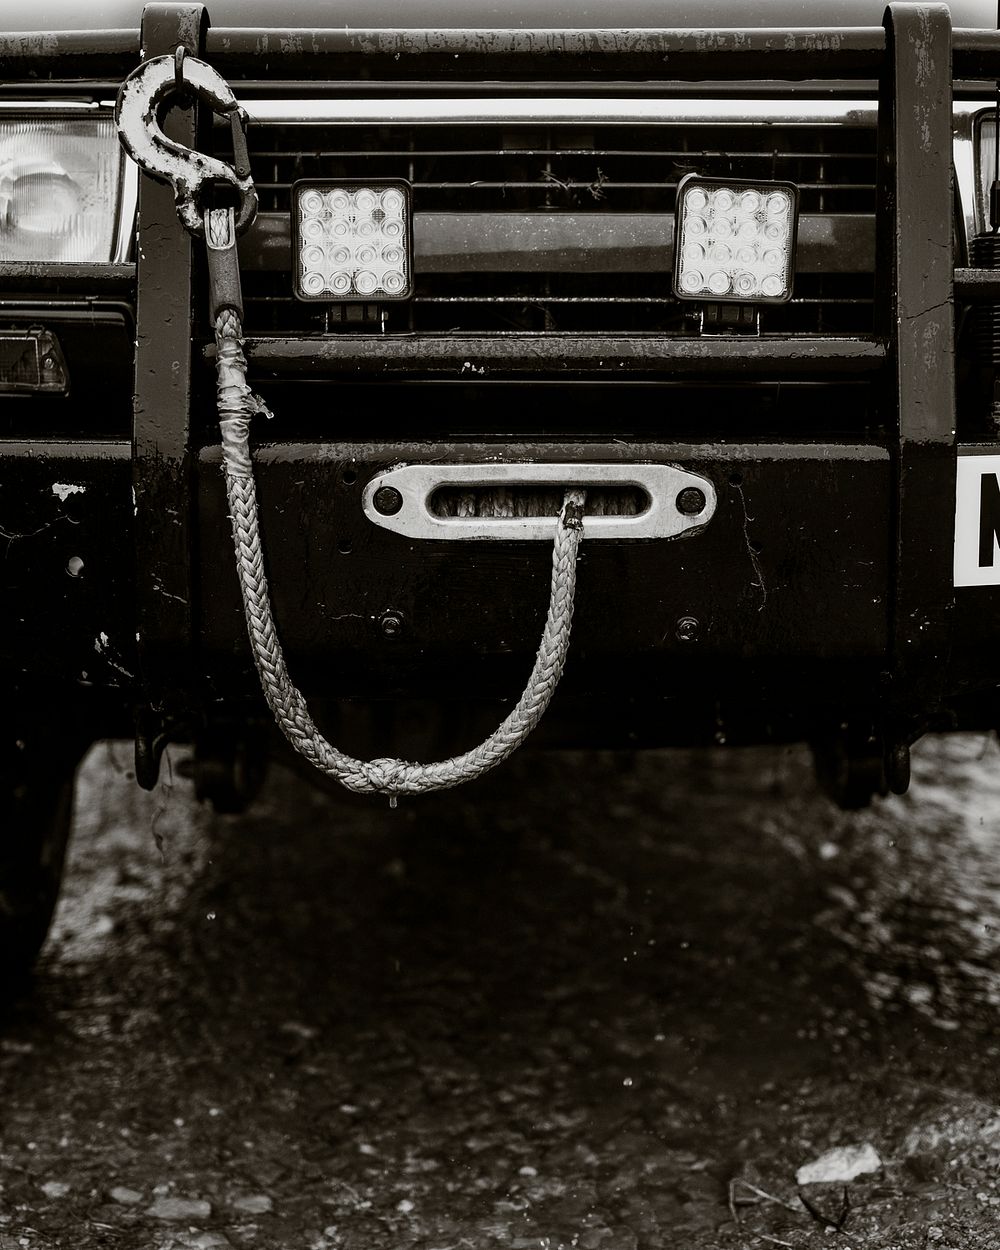 Towing cable hanging on a car front 